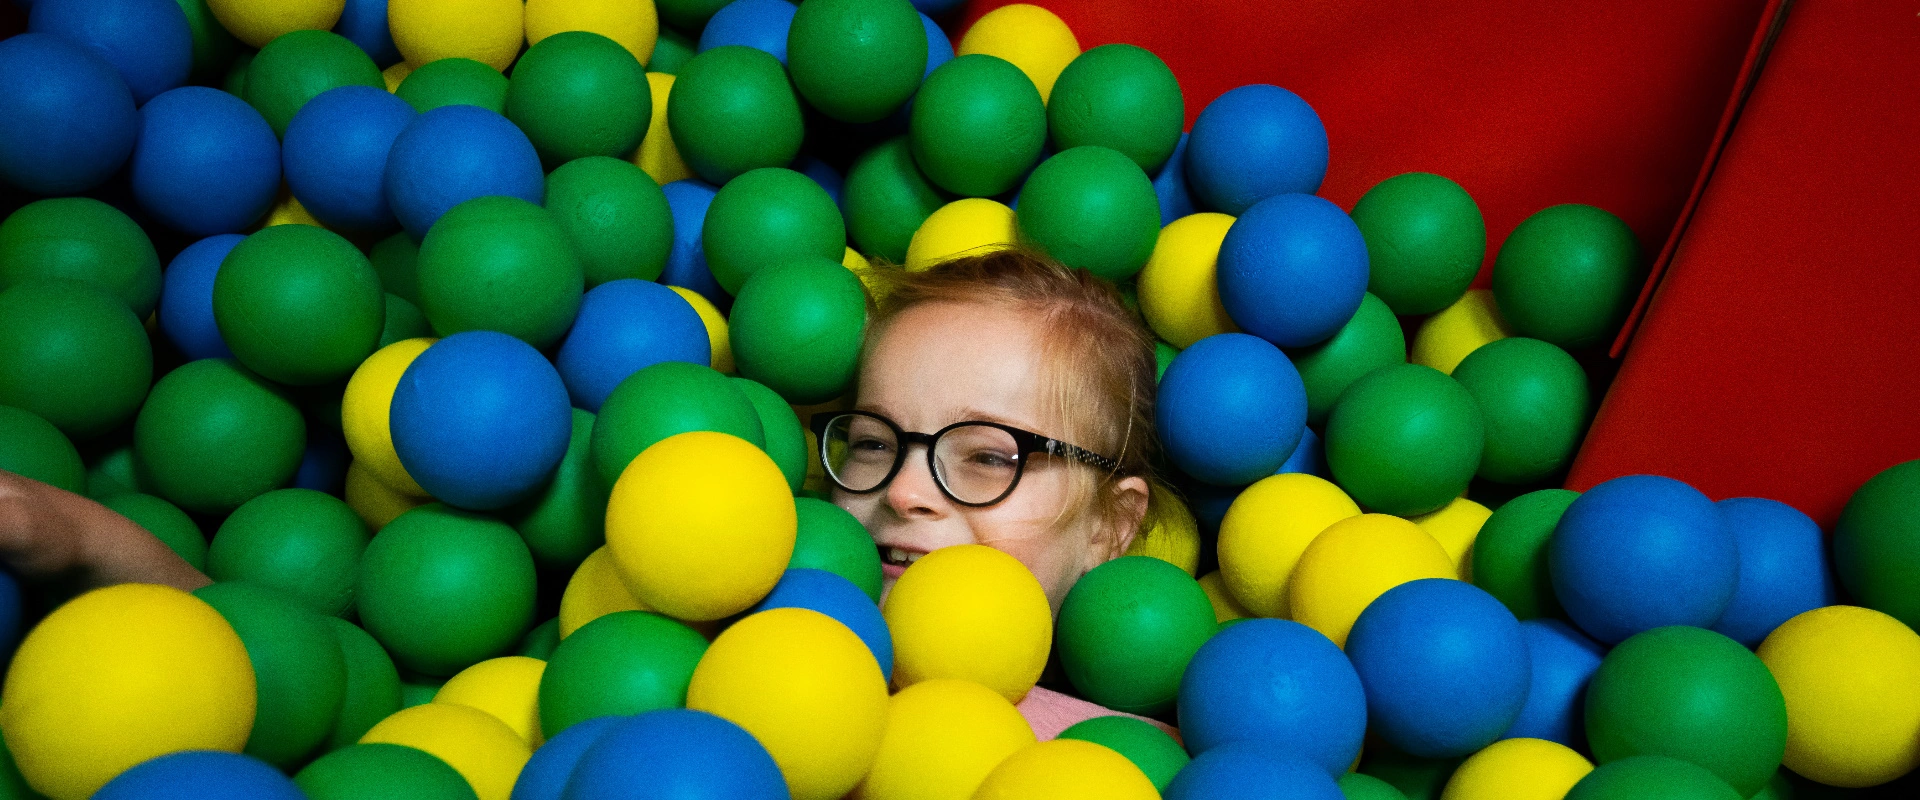 Student in the ball pool.